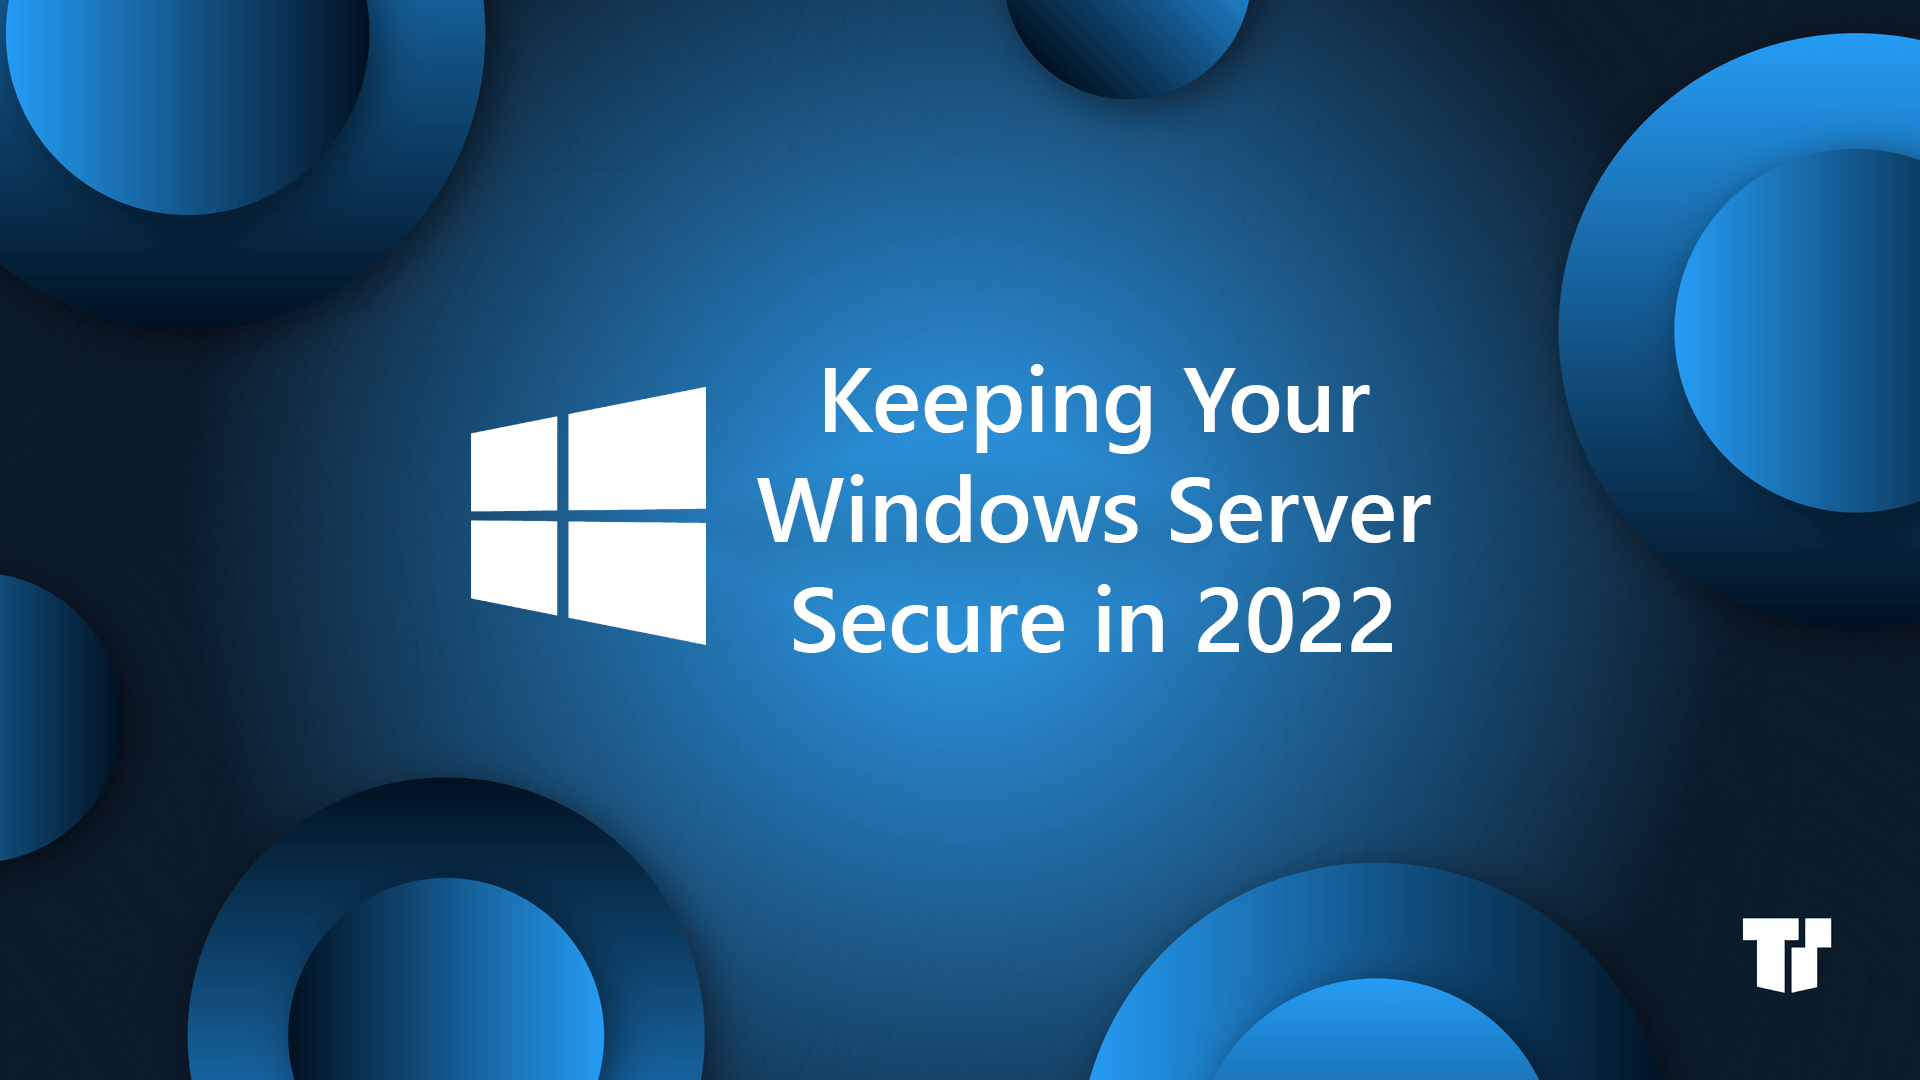 Windows Server Top Security Recommendations  cover image